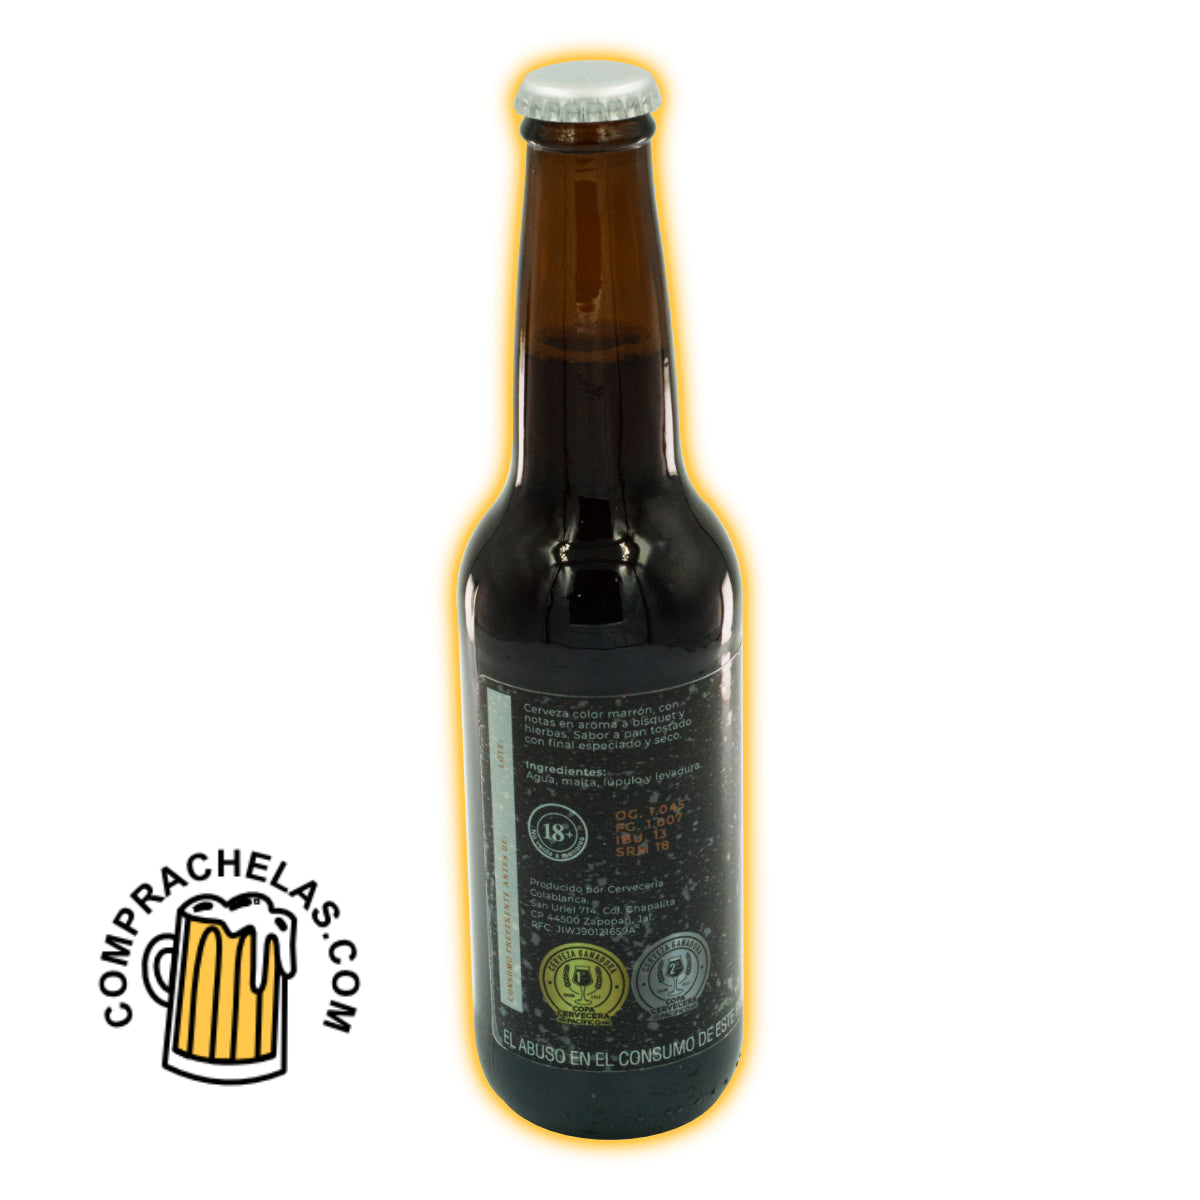 Colablanca Leña: Dark Lager Beer with Smoked Flavors and Distinction